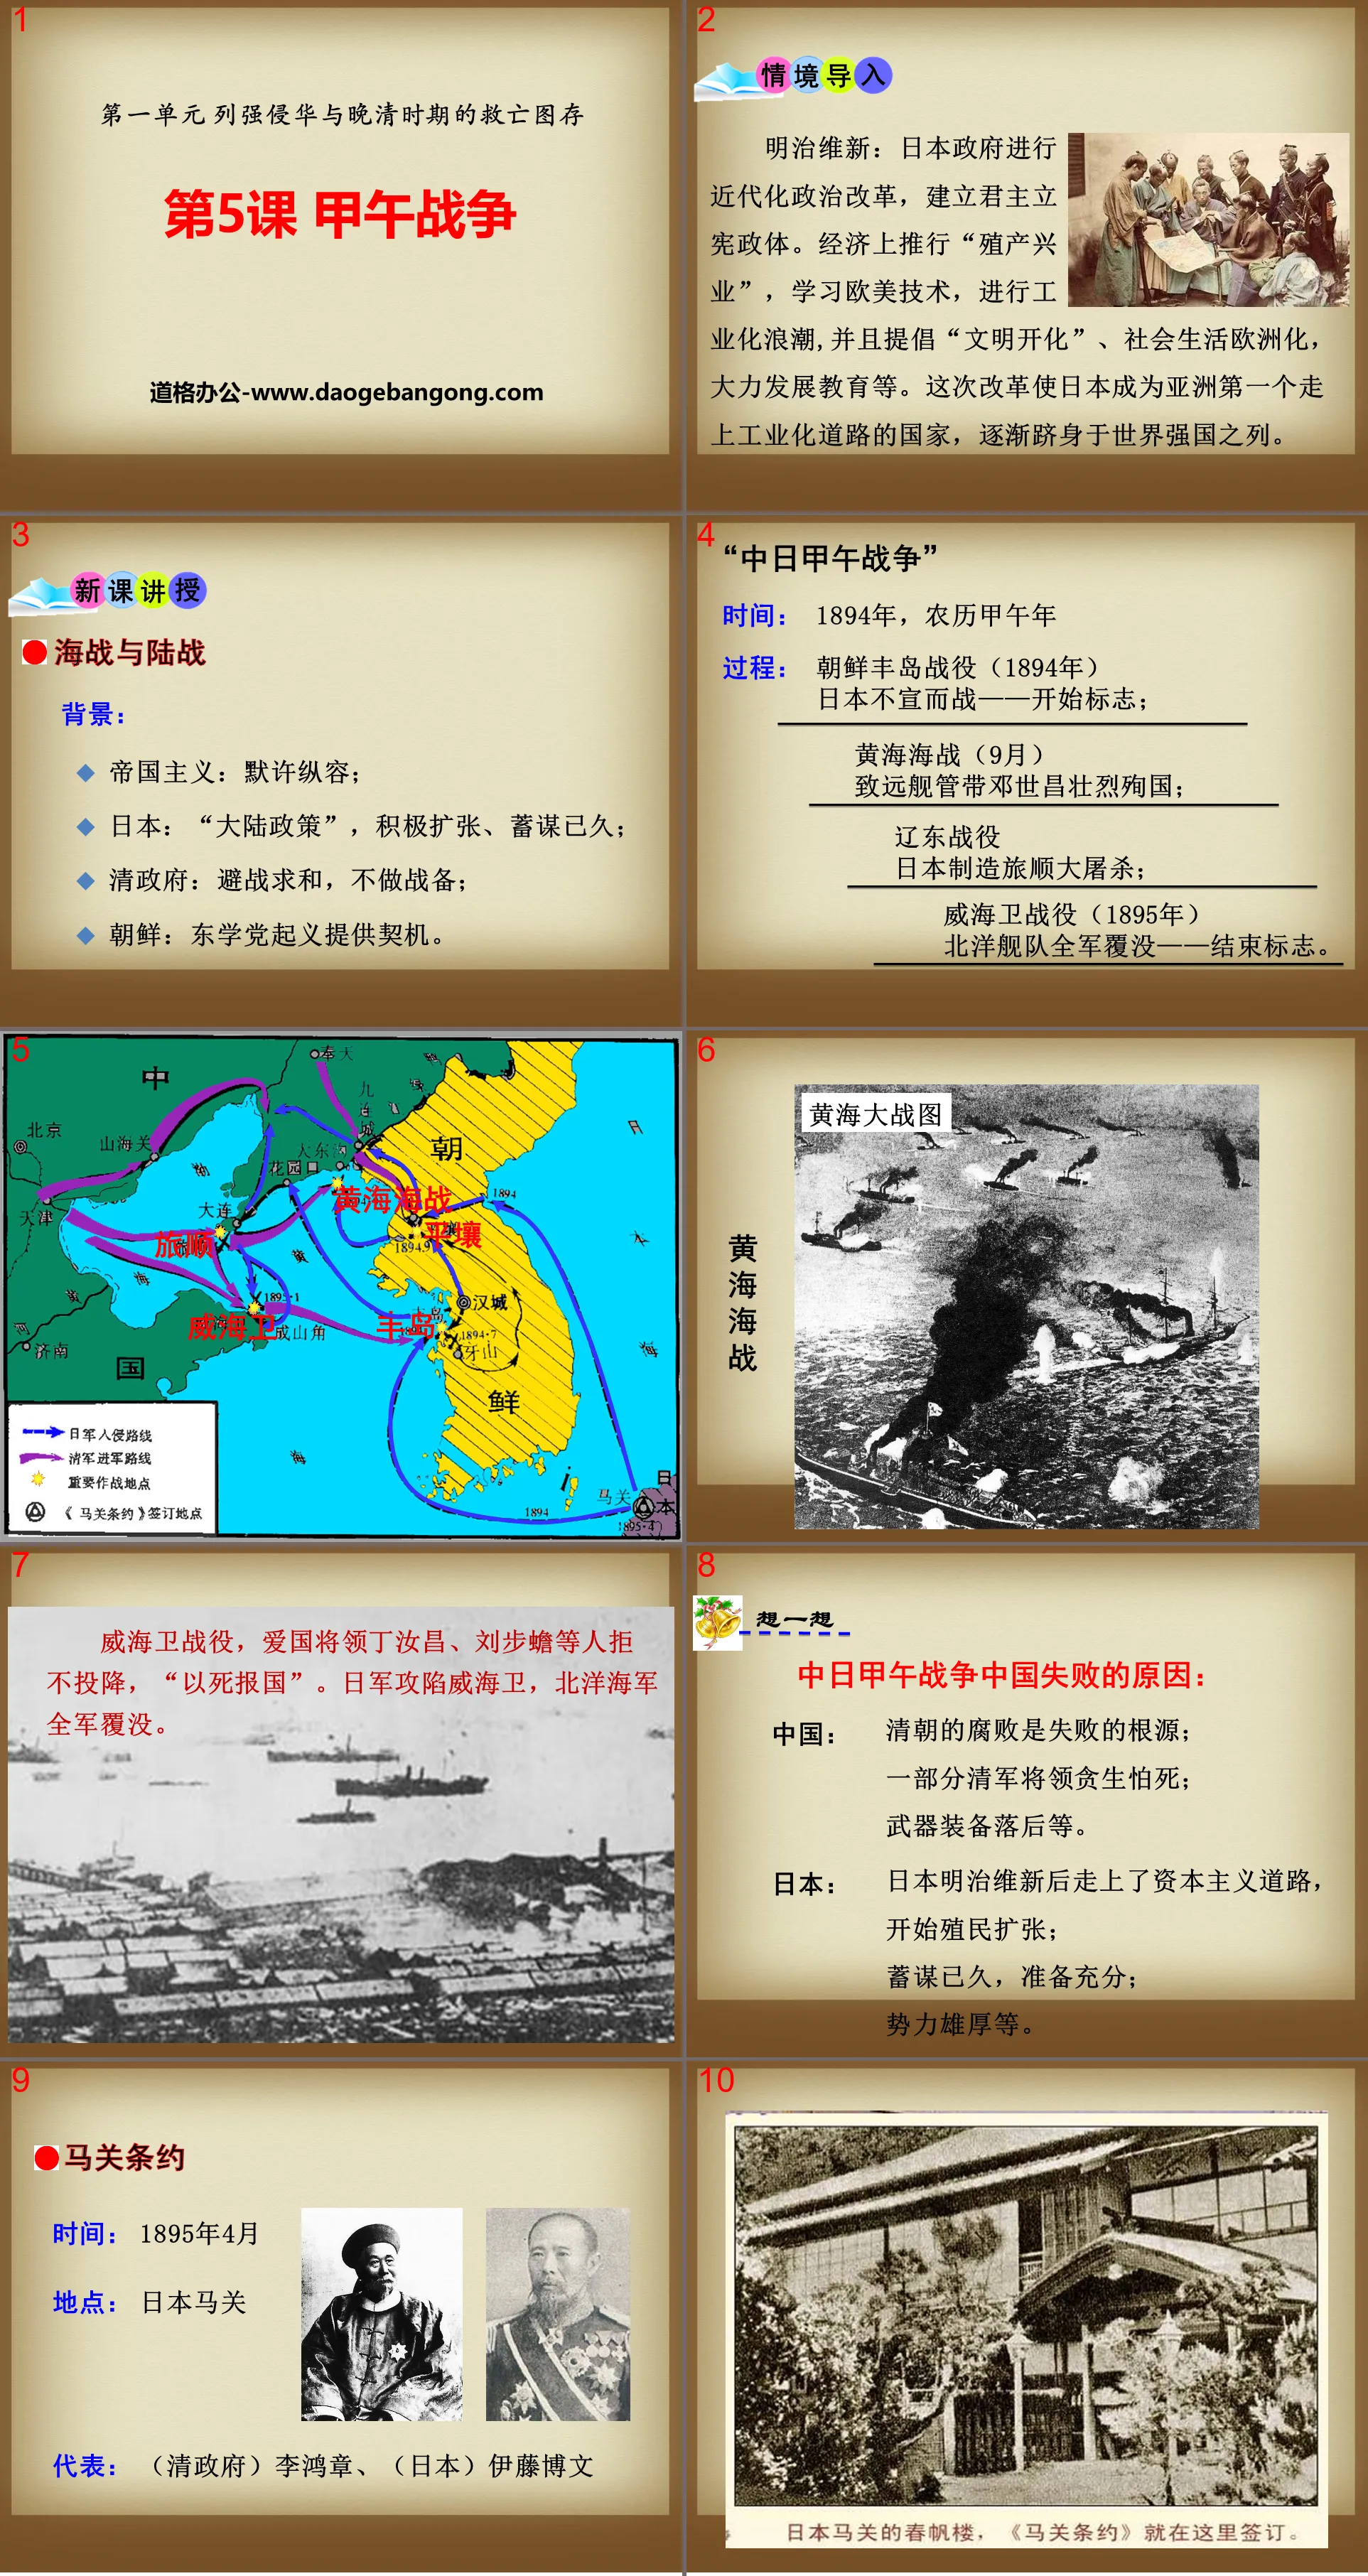 "The Sino-Japanese War of 1894" PPT courseware on the invasion of China by foreign powers and the survival of the nation during the Wanqing Period